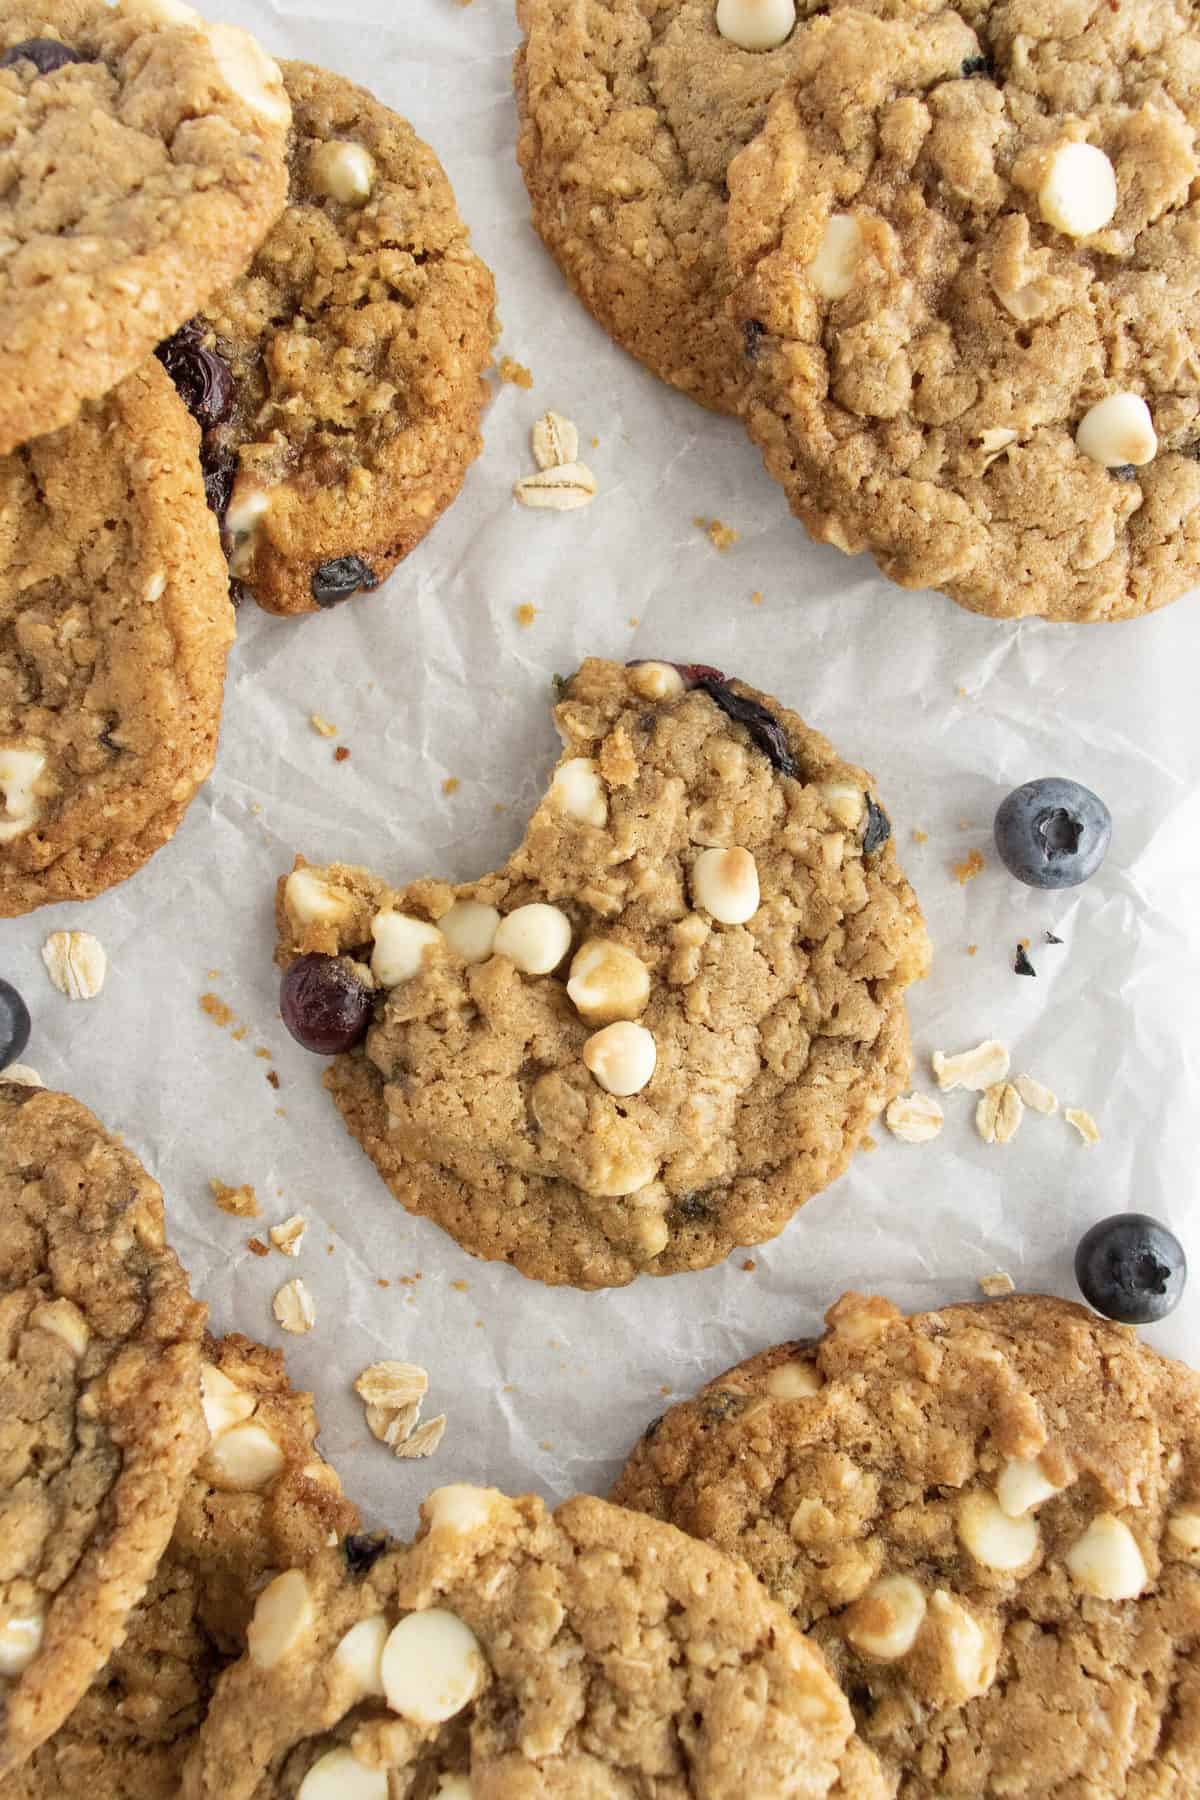 White Chocolate Blueberry Oatmeal Cookies by The BakerMama